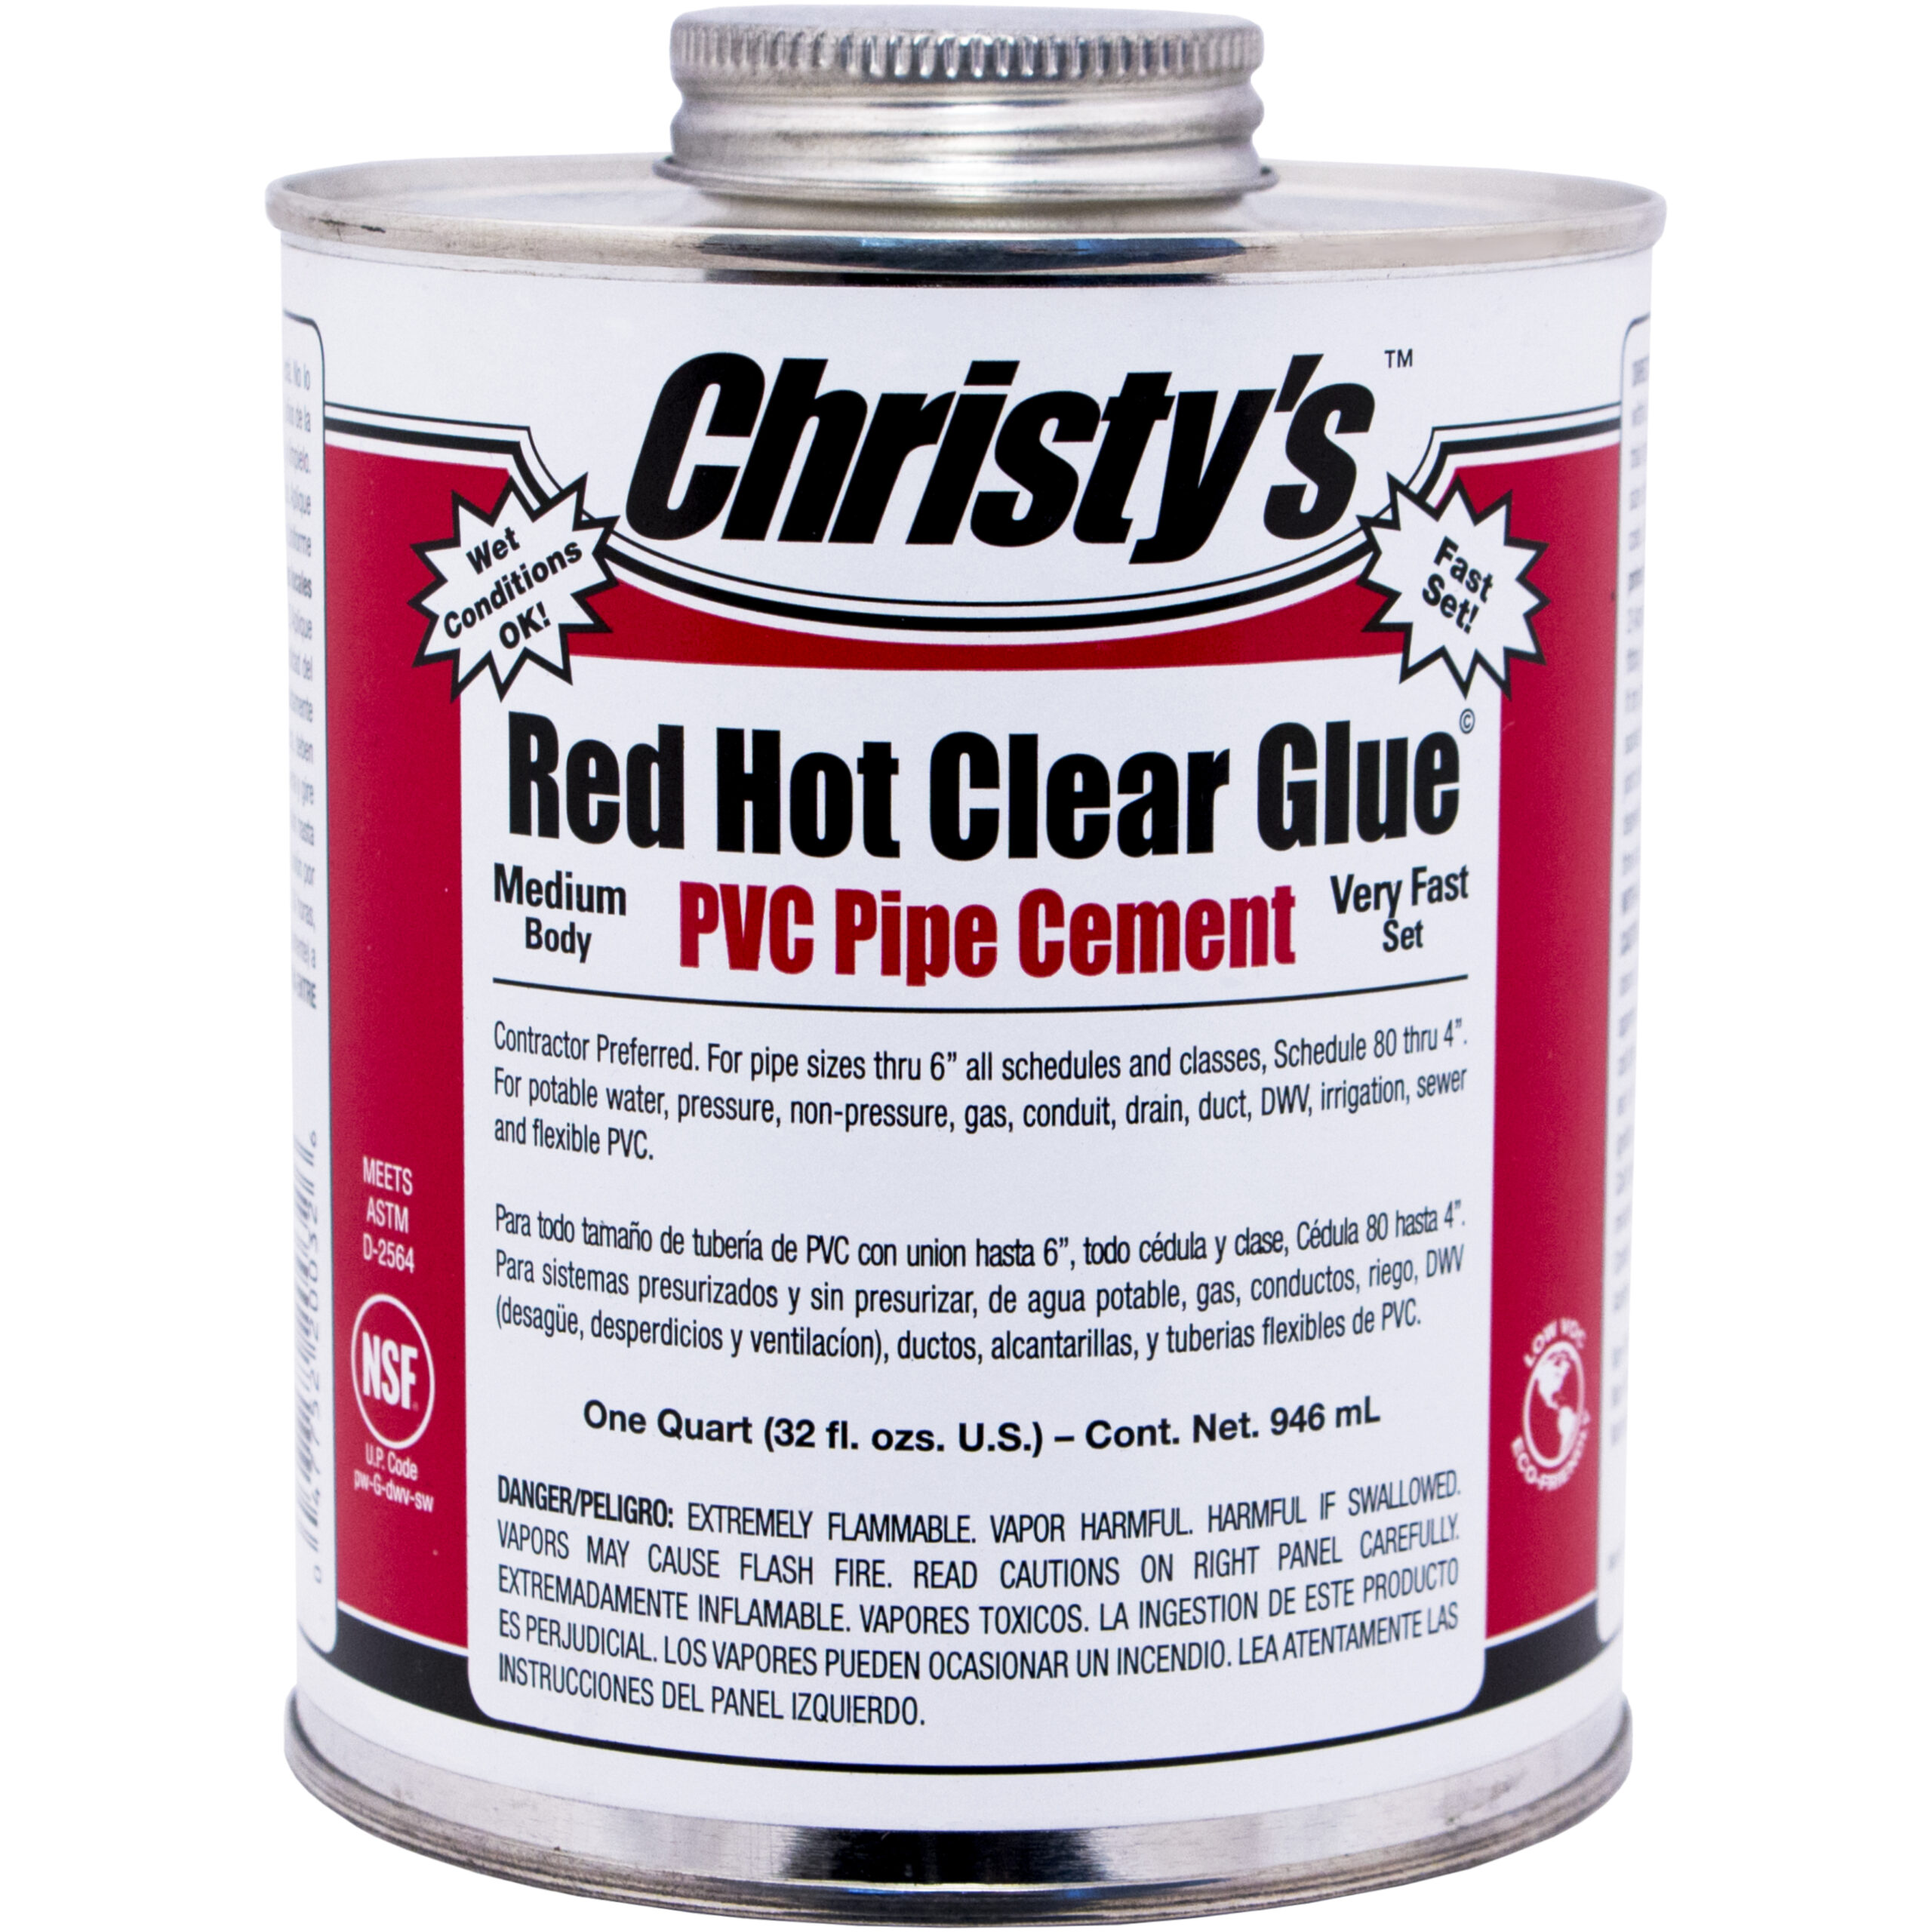 Red Hot Clear Glue - Low VOC - Christy's